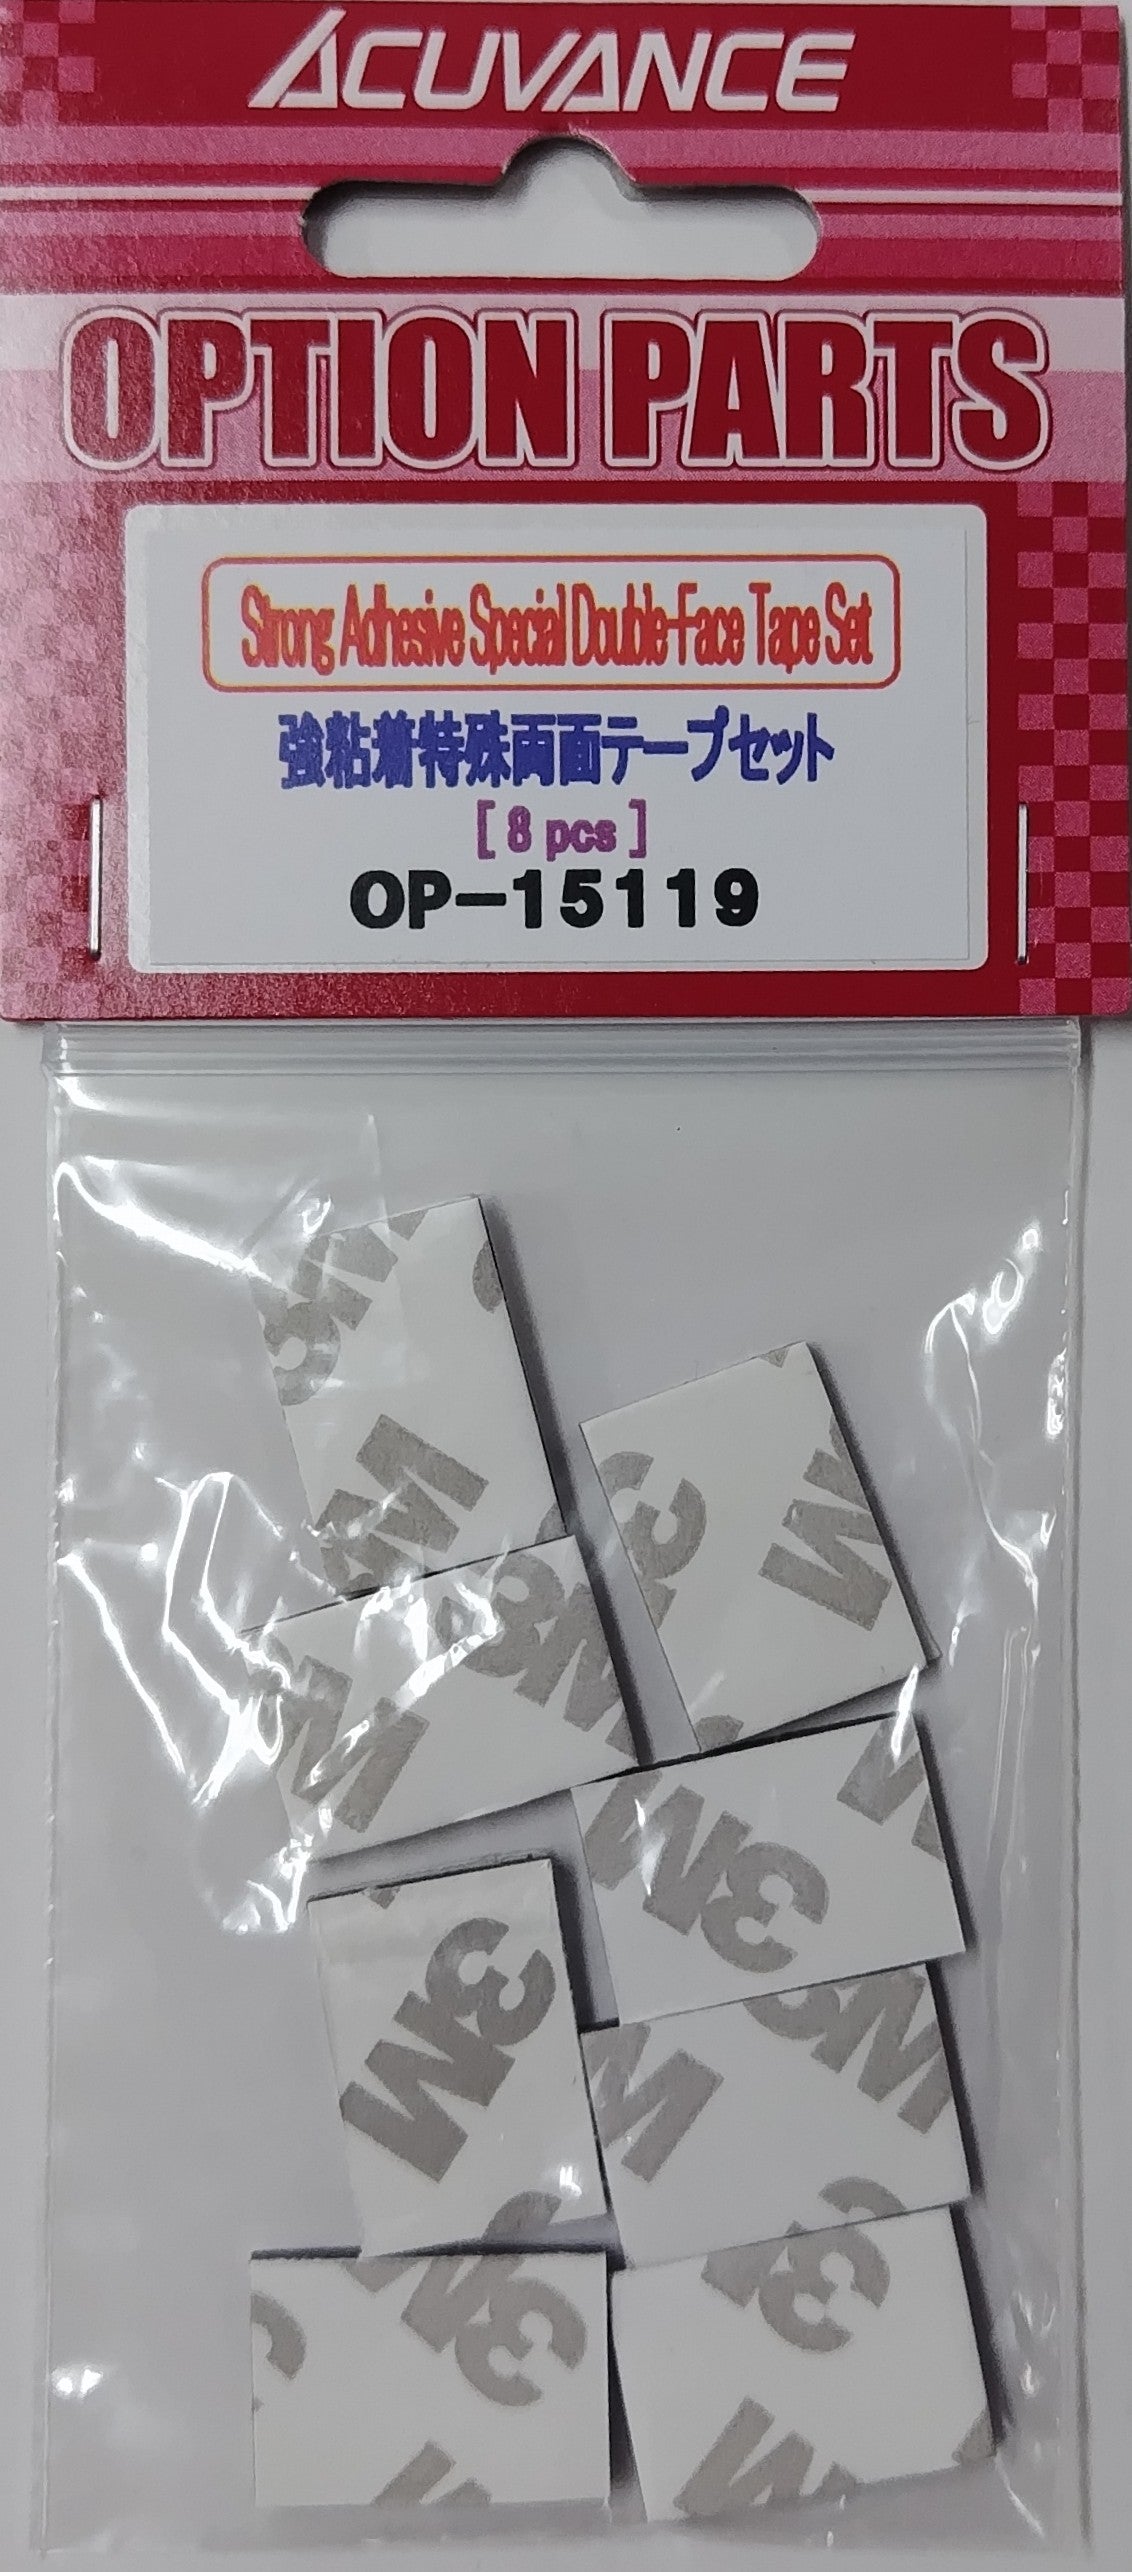 Acuvance OP-15119 Strong adhesive special double-sided tape set - BanzaiHobby